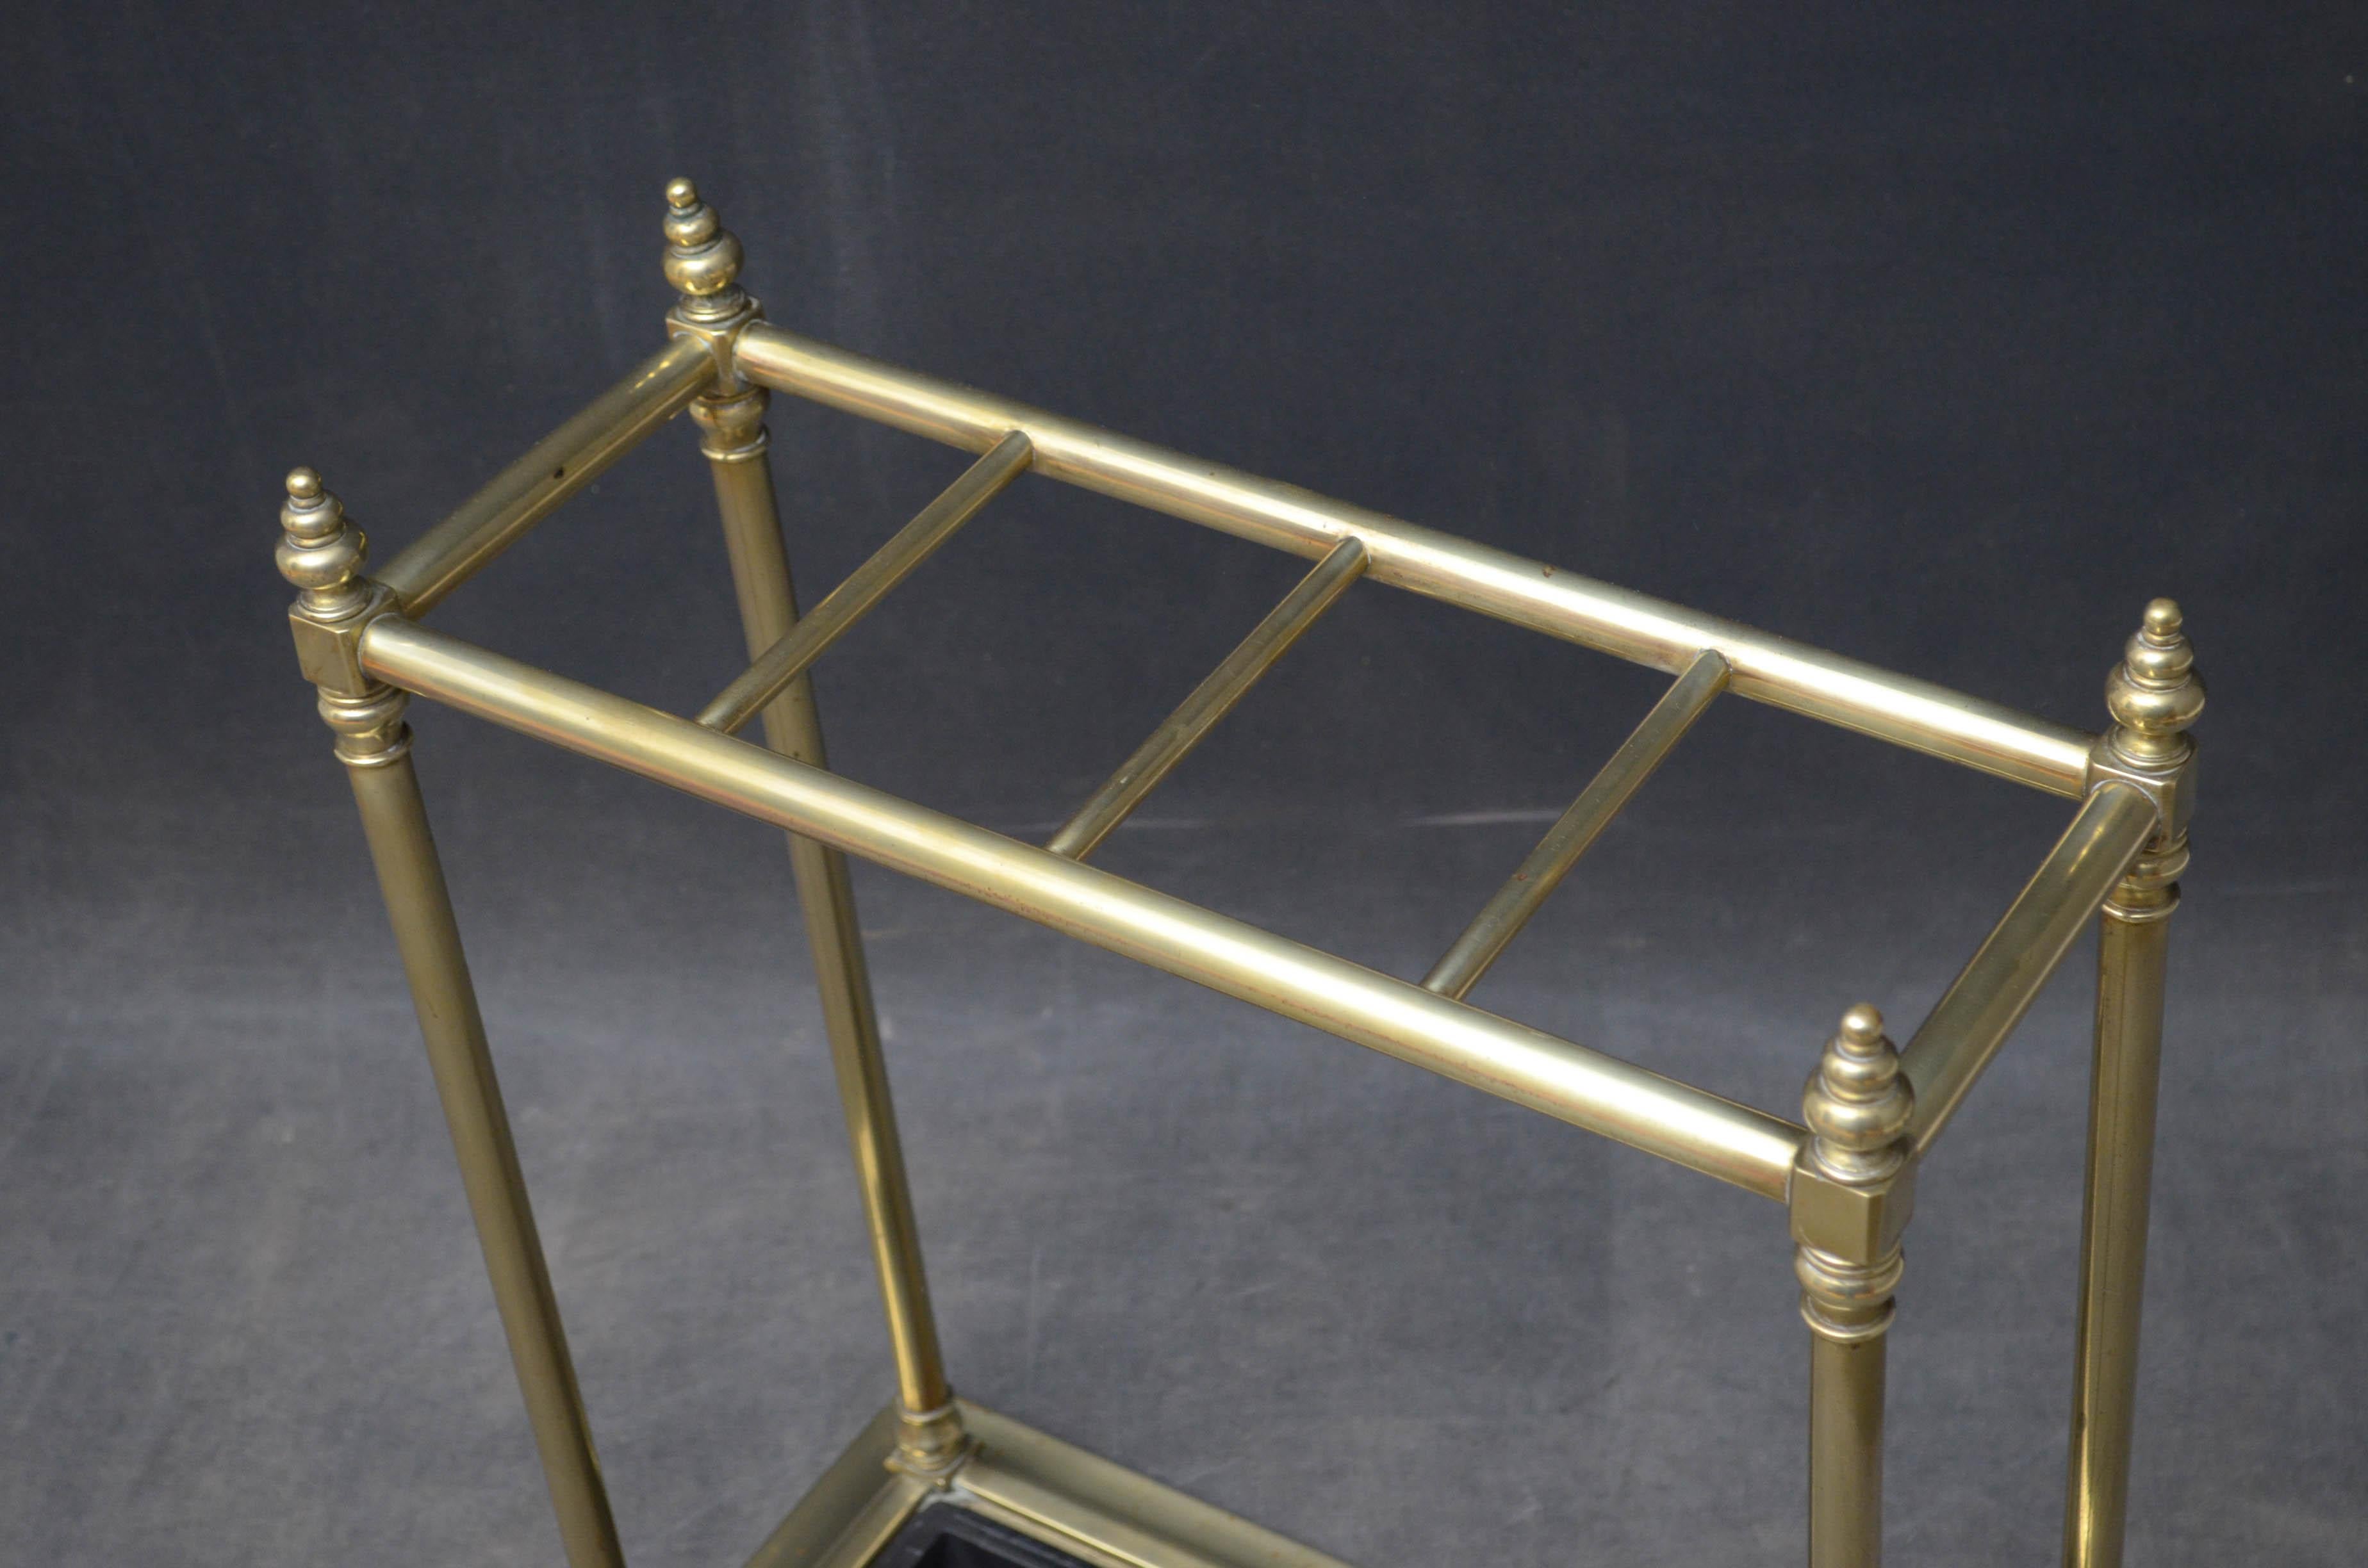 Sn4793 Victorian umbrella stand in brass with 4 compartments flanked by finials, original drip tray and brass base. All in excellent home ready condition, circa 1880.
Measures: H 24.5